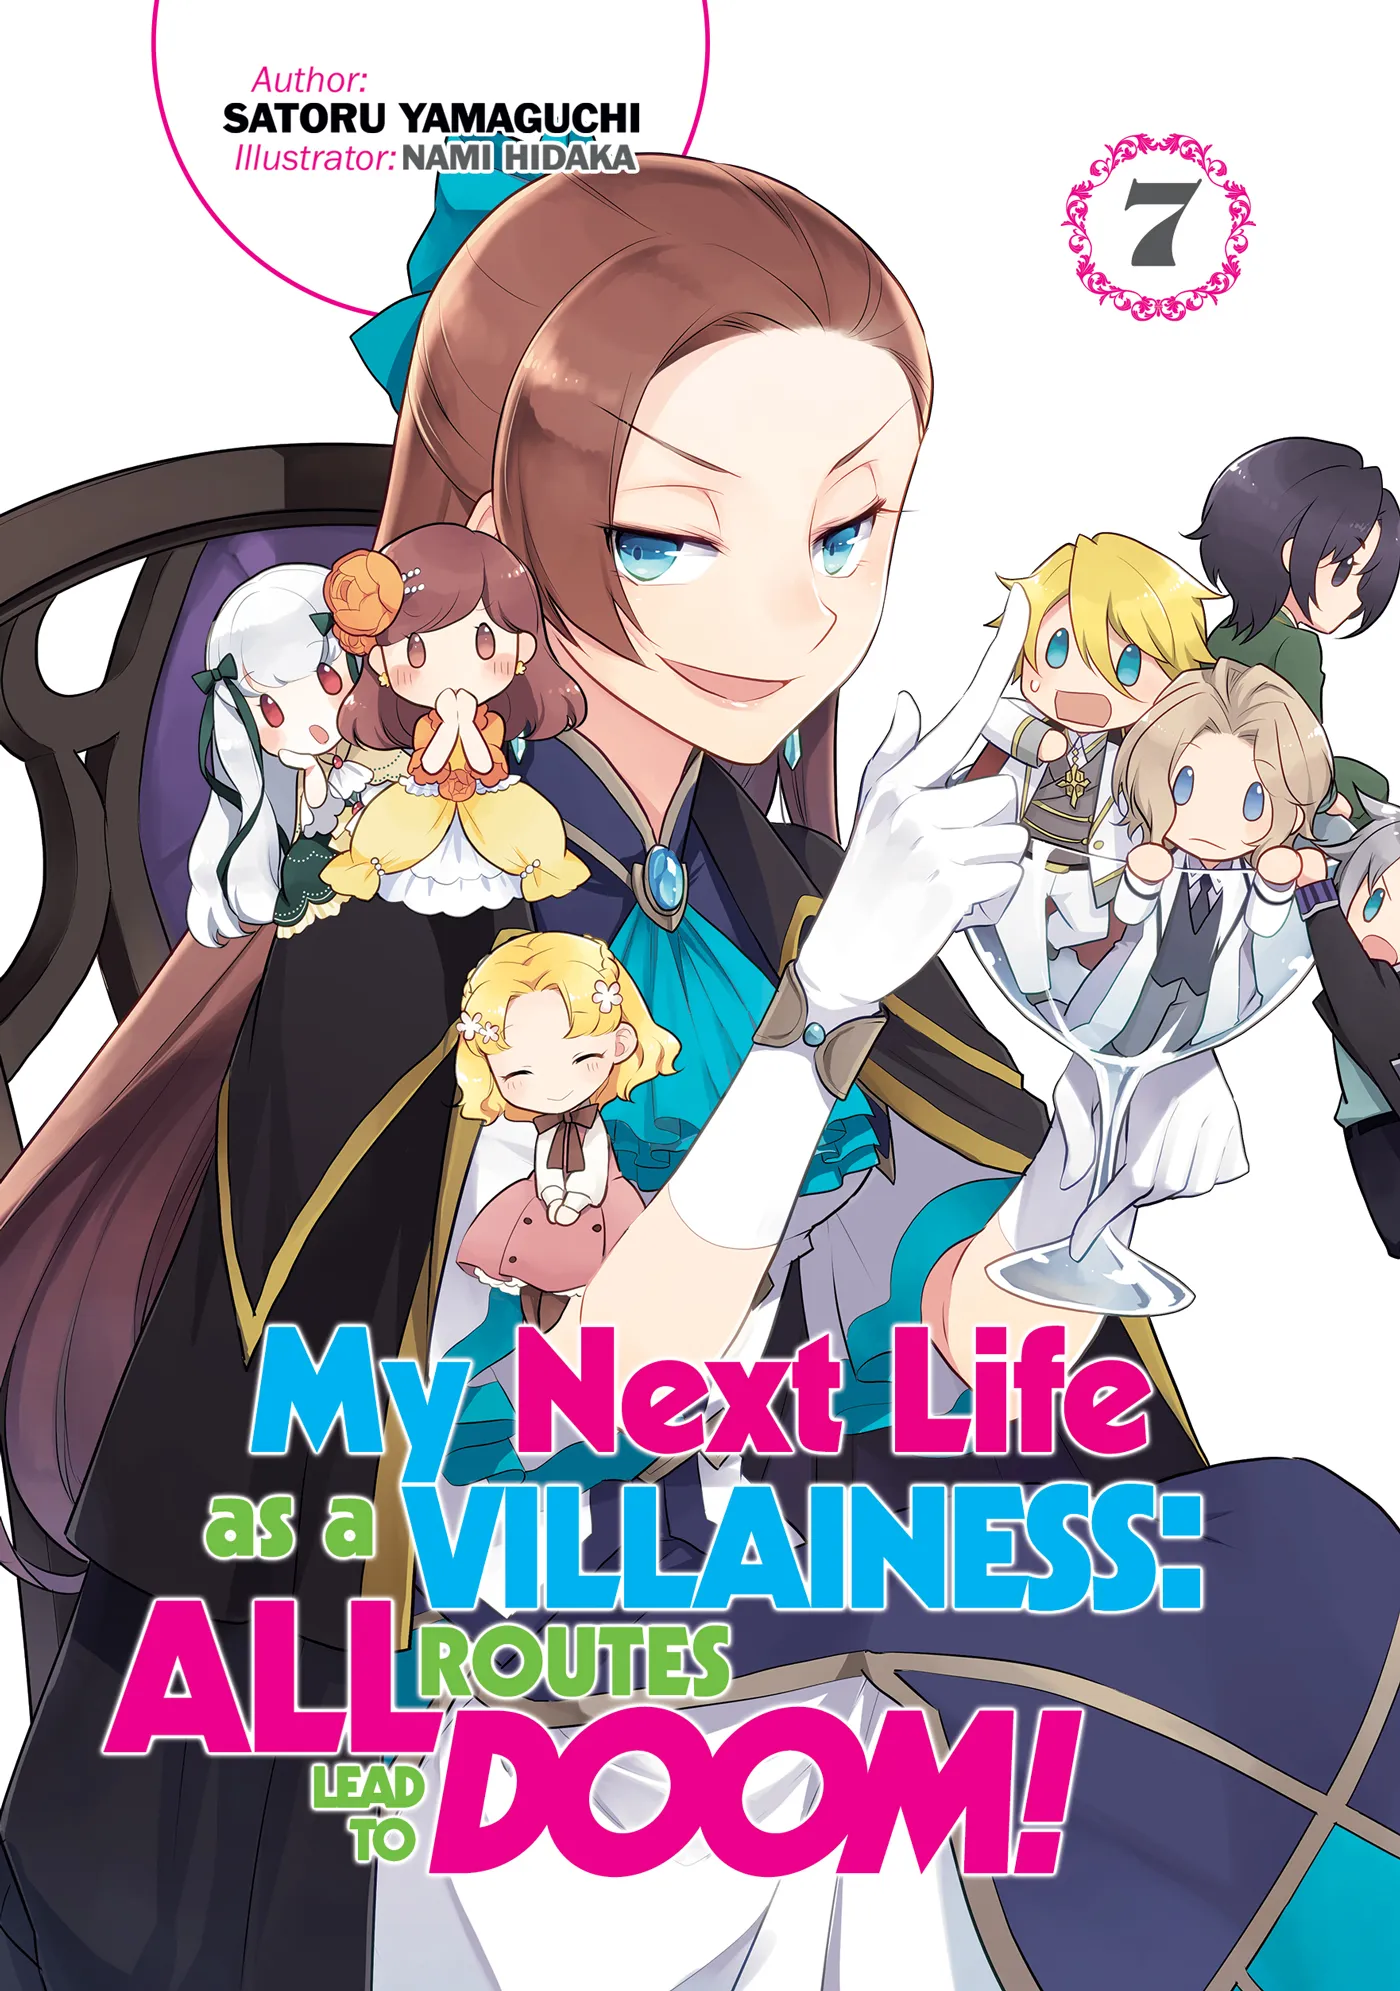 My Next Life as a Villainess: All Routes Lead to Doom! Volume 7 (My Next Life as a Villainess: All Routes Lead to Doom! #7)